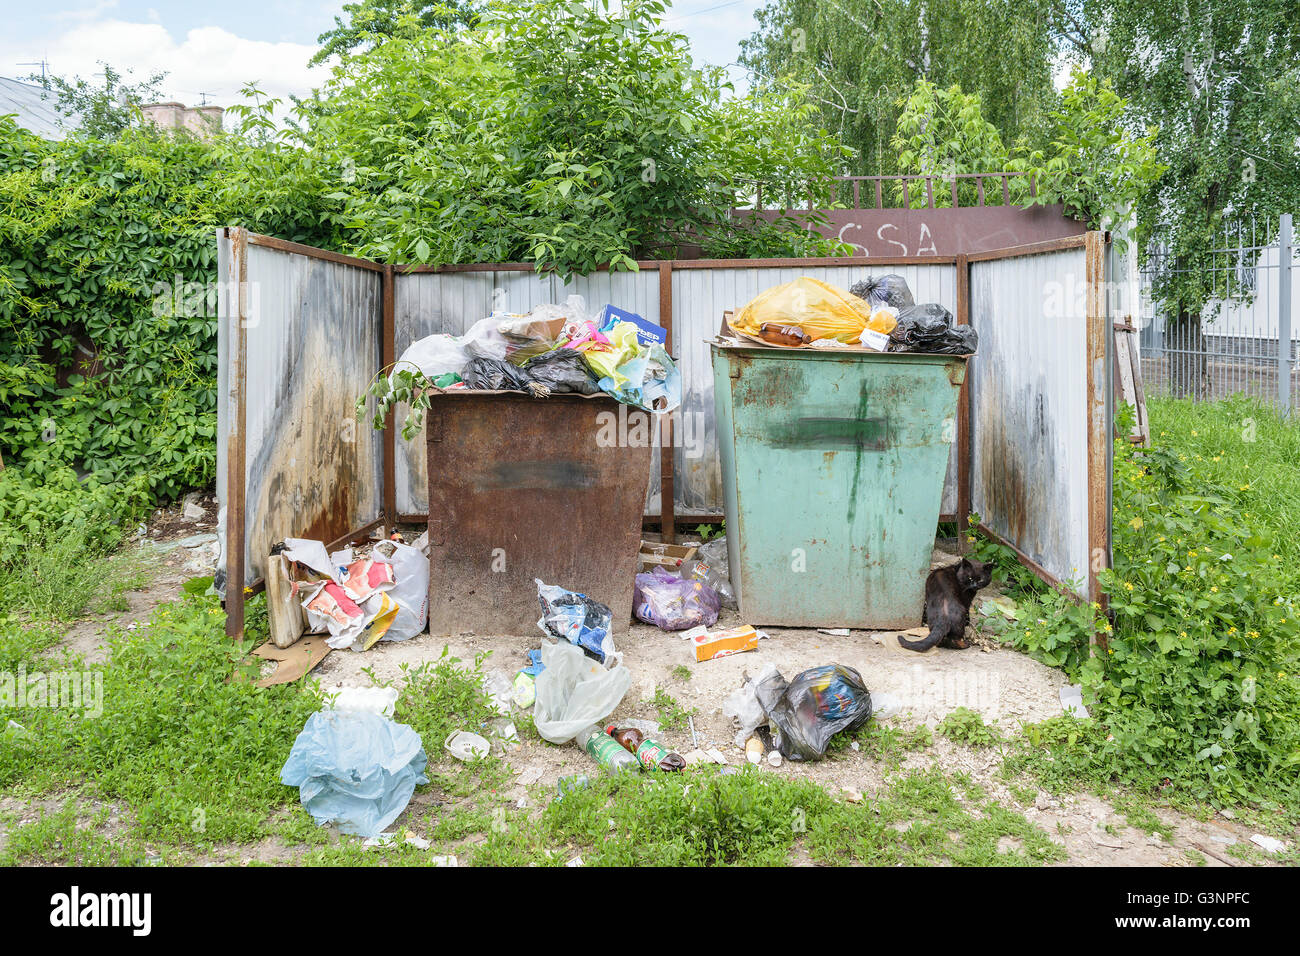 Orel, Russia - June 02, 2016: Garbage in the trash containers near the entrance to the Center for Hygiene and Epidemiology Stock Photo